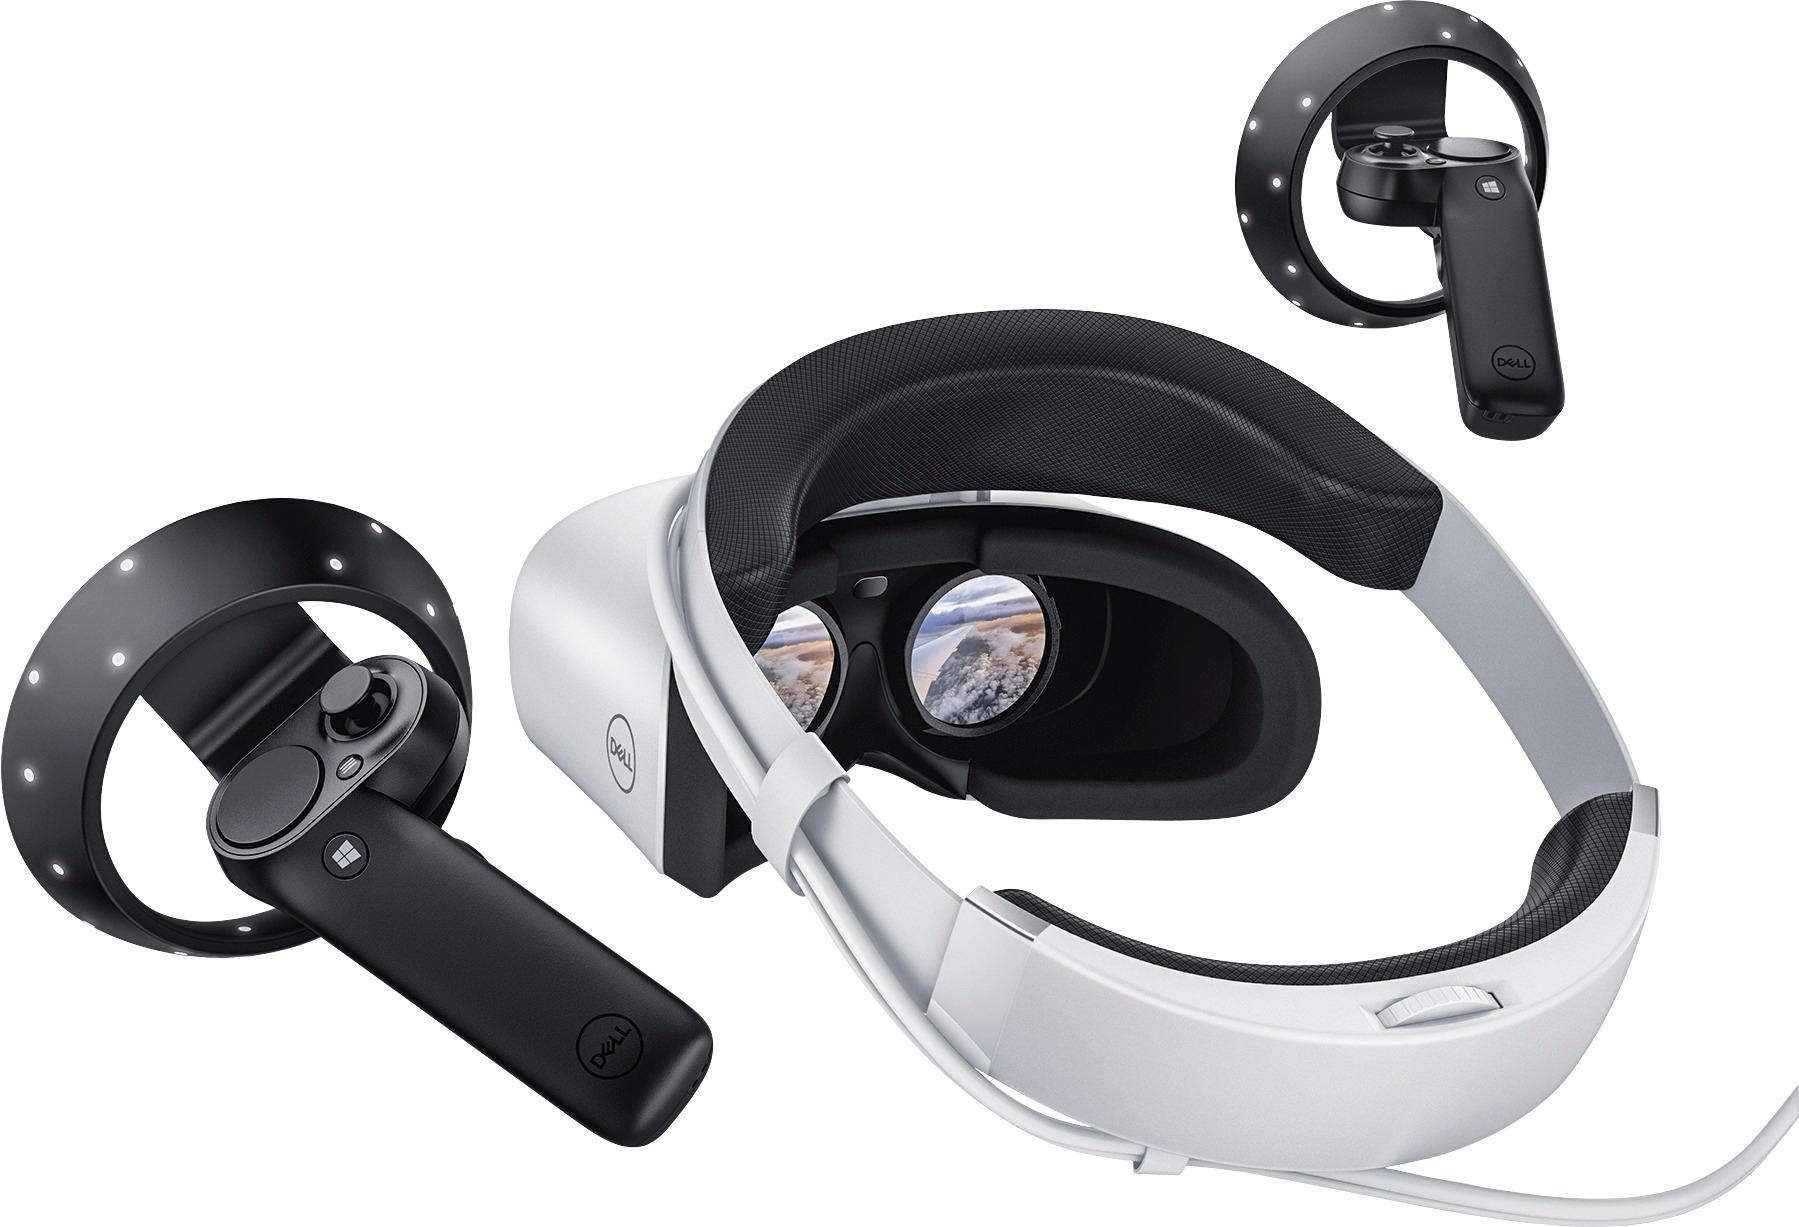 dell visor virtual reality headset with controllers for windows pcs vrp100